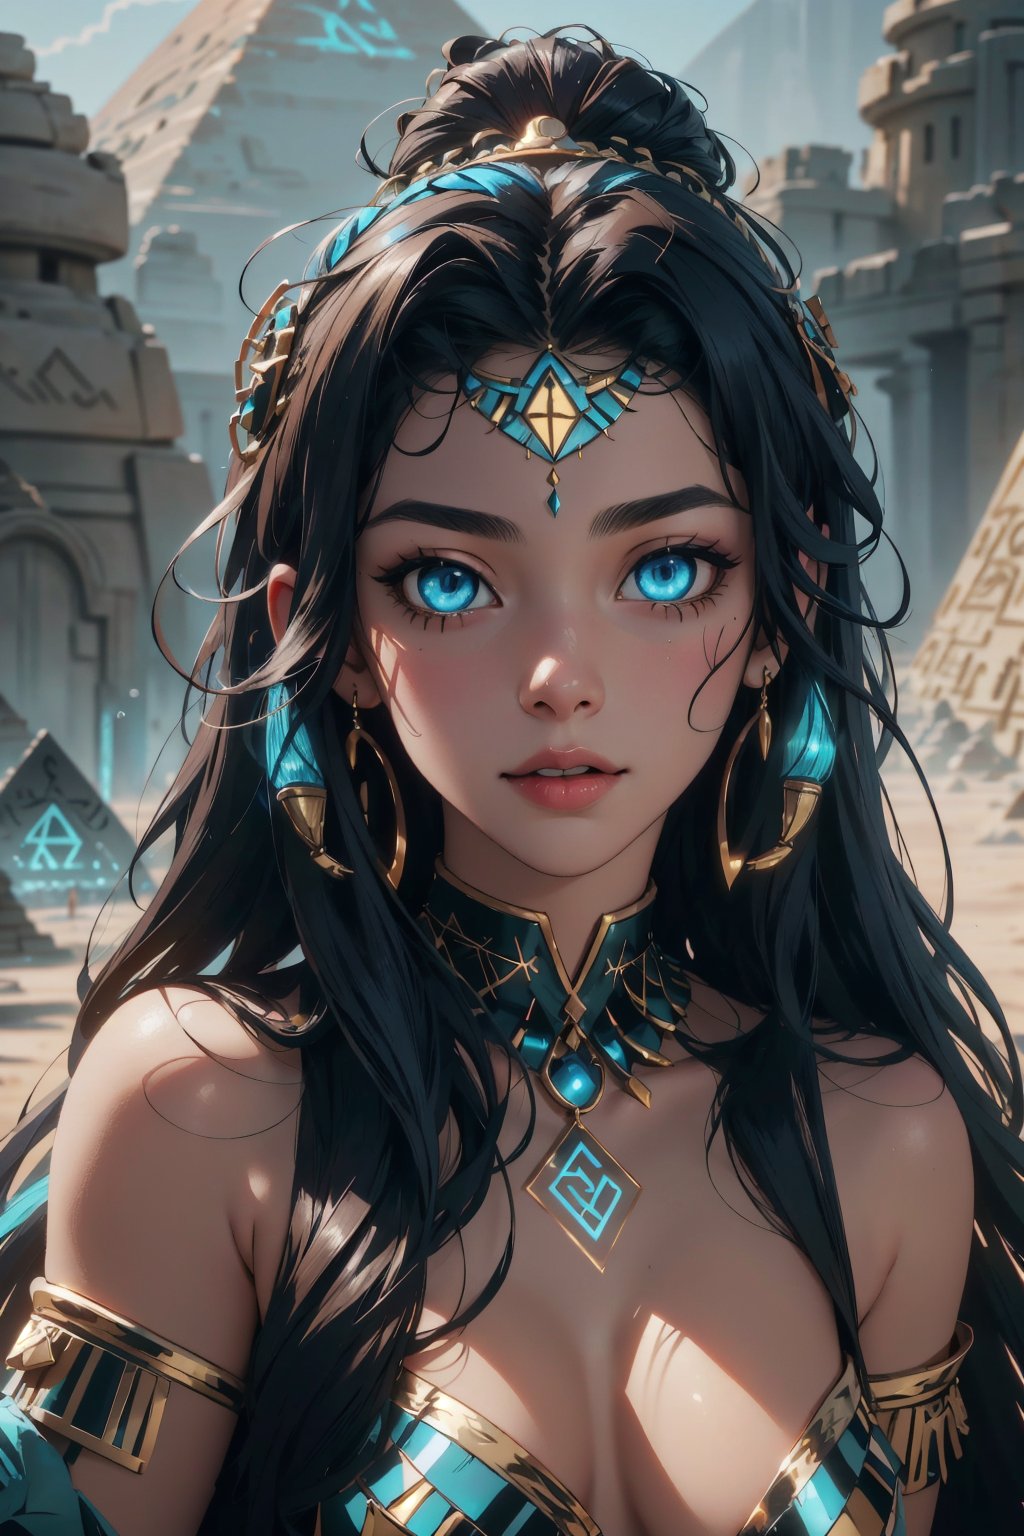 Highres, best quality, extremely detailed, area lighting in background, HD, 8k, extremely intricate:1.3), realistic, LOLI, SMALL BODY, CUTE, (portrait:1.2) (sexy Cleopatra), (sexy, skimpy, sheer, fantasy Egyptian costume), (colorful), (fantasy Egyptian cosmetics), full_body, T-pose, dynamic pose,outdoors, night, desert setting, Pyramid in background, Detailedface, (perfectly drawn eyes:1.2), nsfw,GlowingRunes_blue, runes